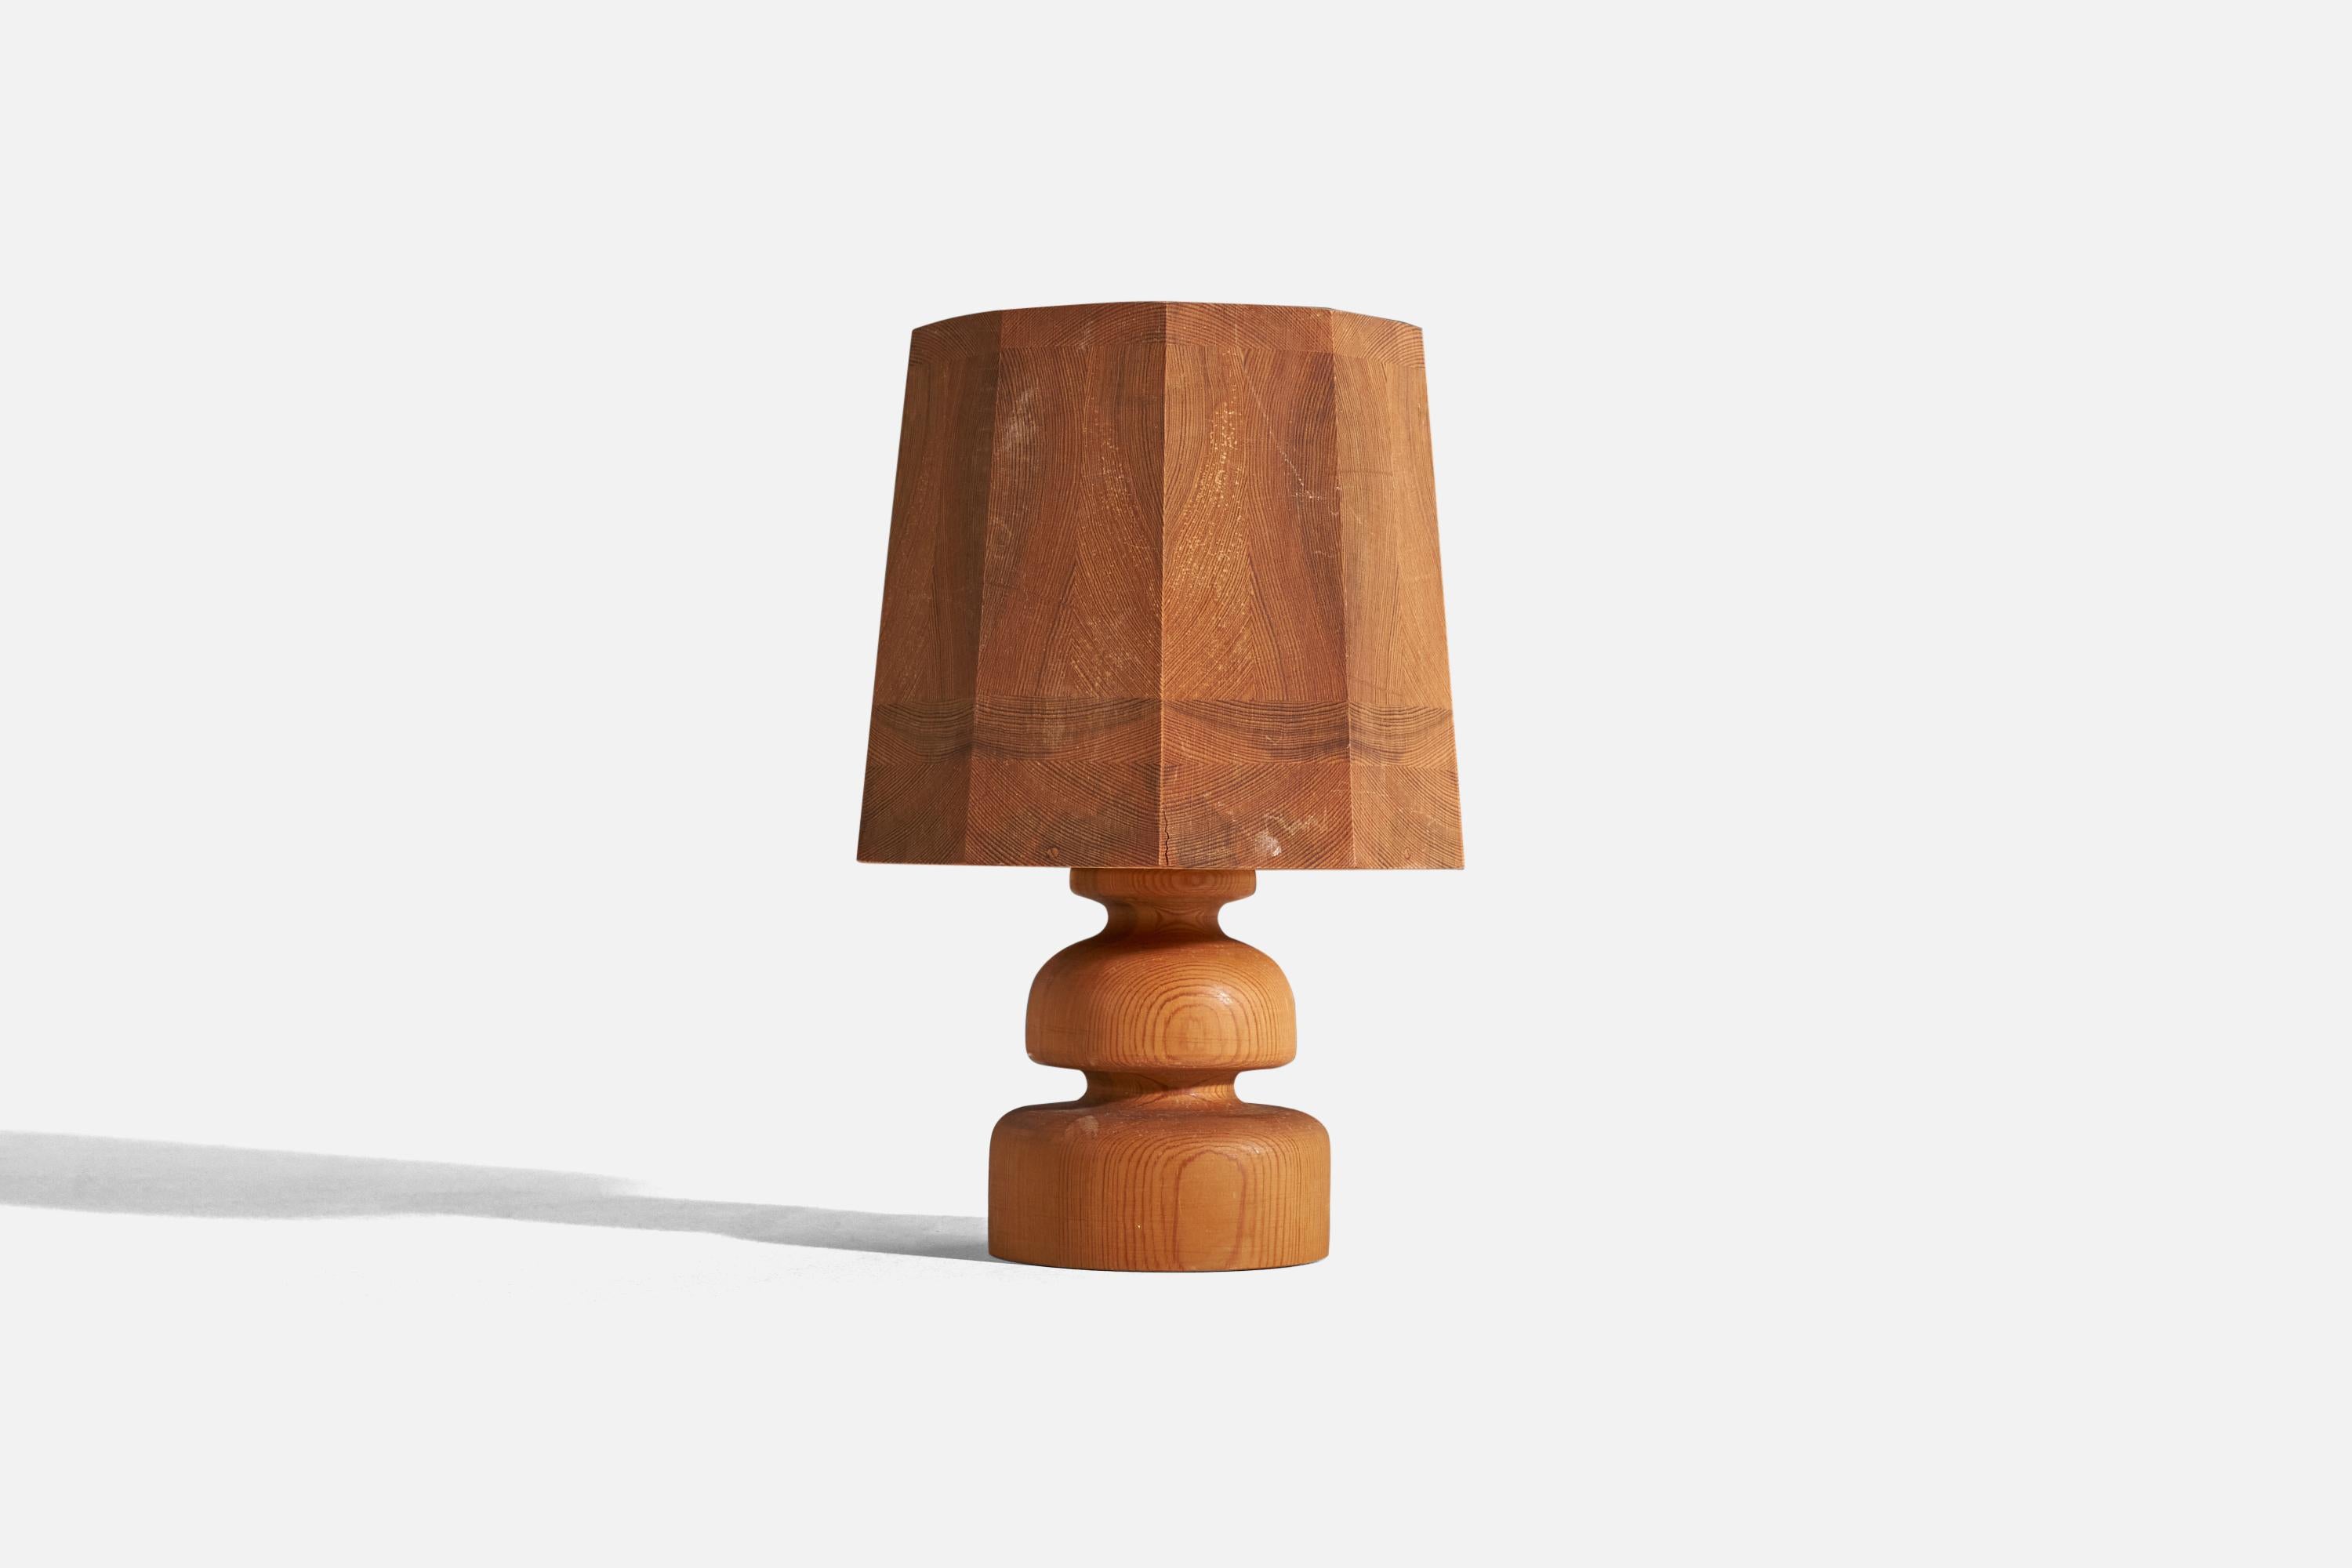 A pine table lamp designed and produced in Sweden, c. 1970s.

